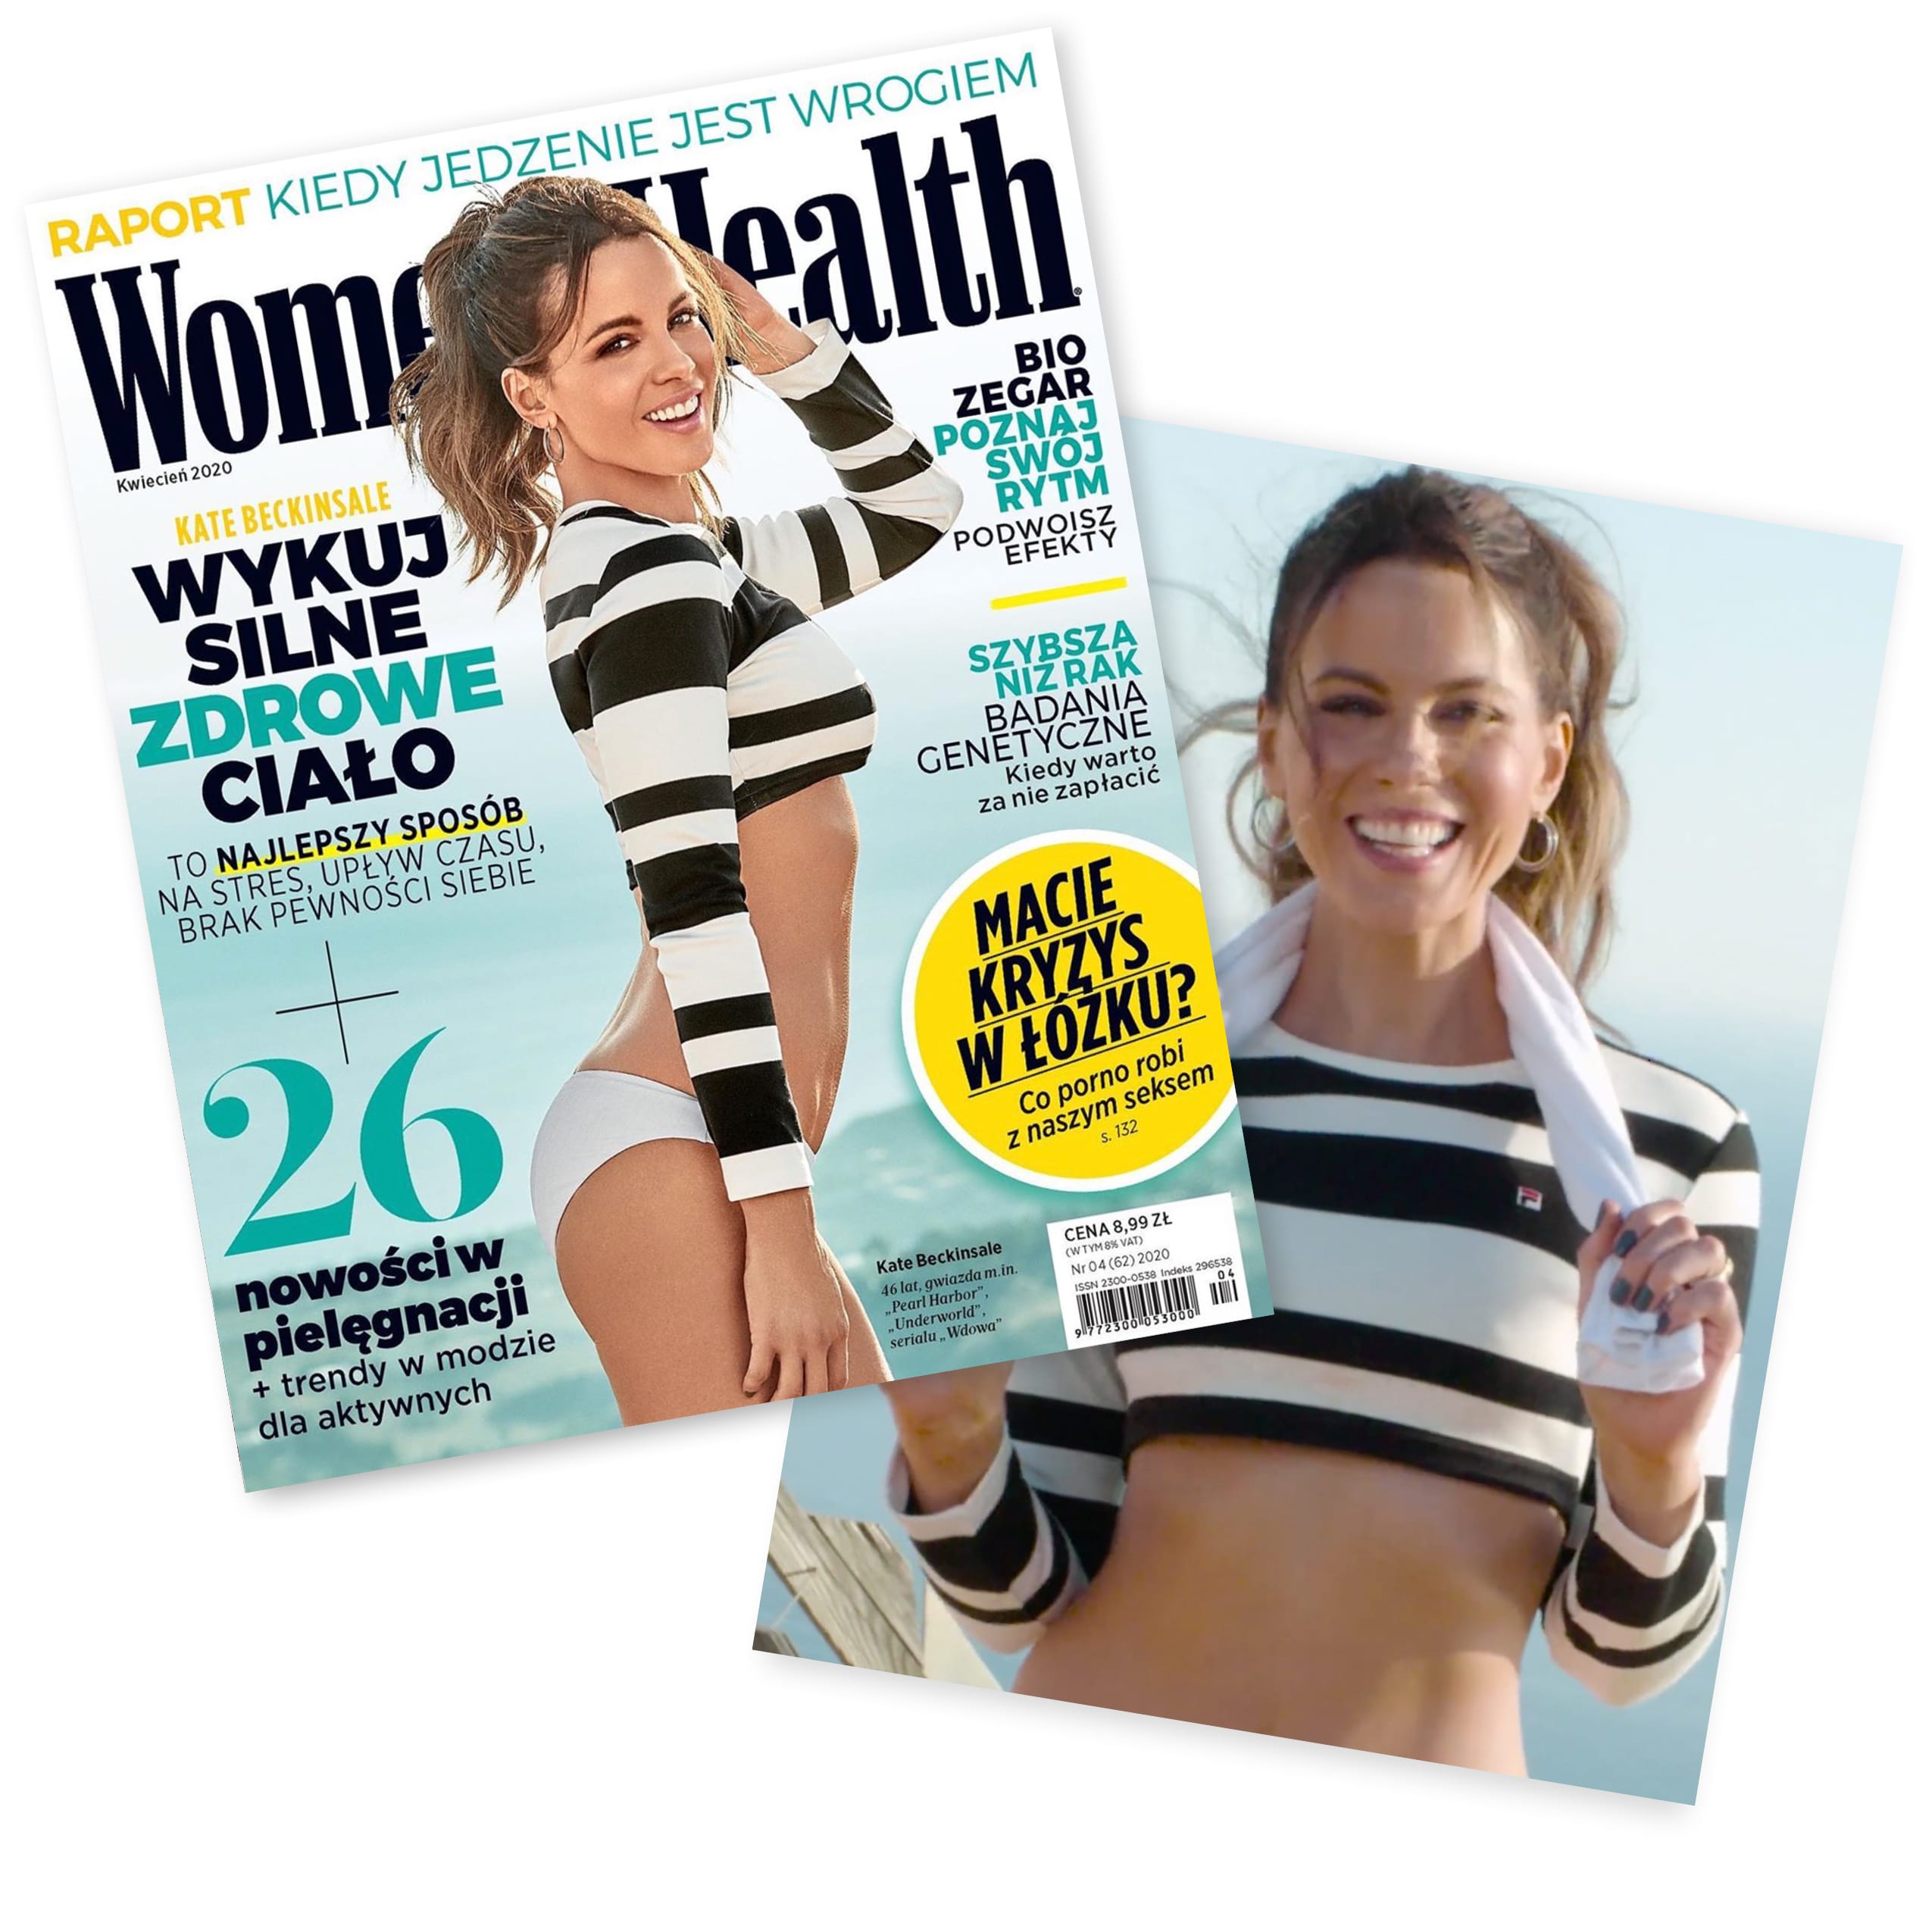 We went International!! Our Thin Hoops were on the cover of Women's Health Poland with Kate Beckinsale!